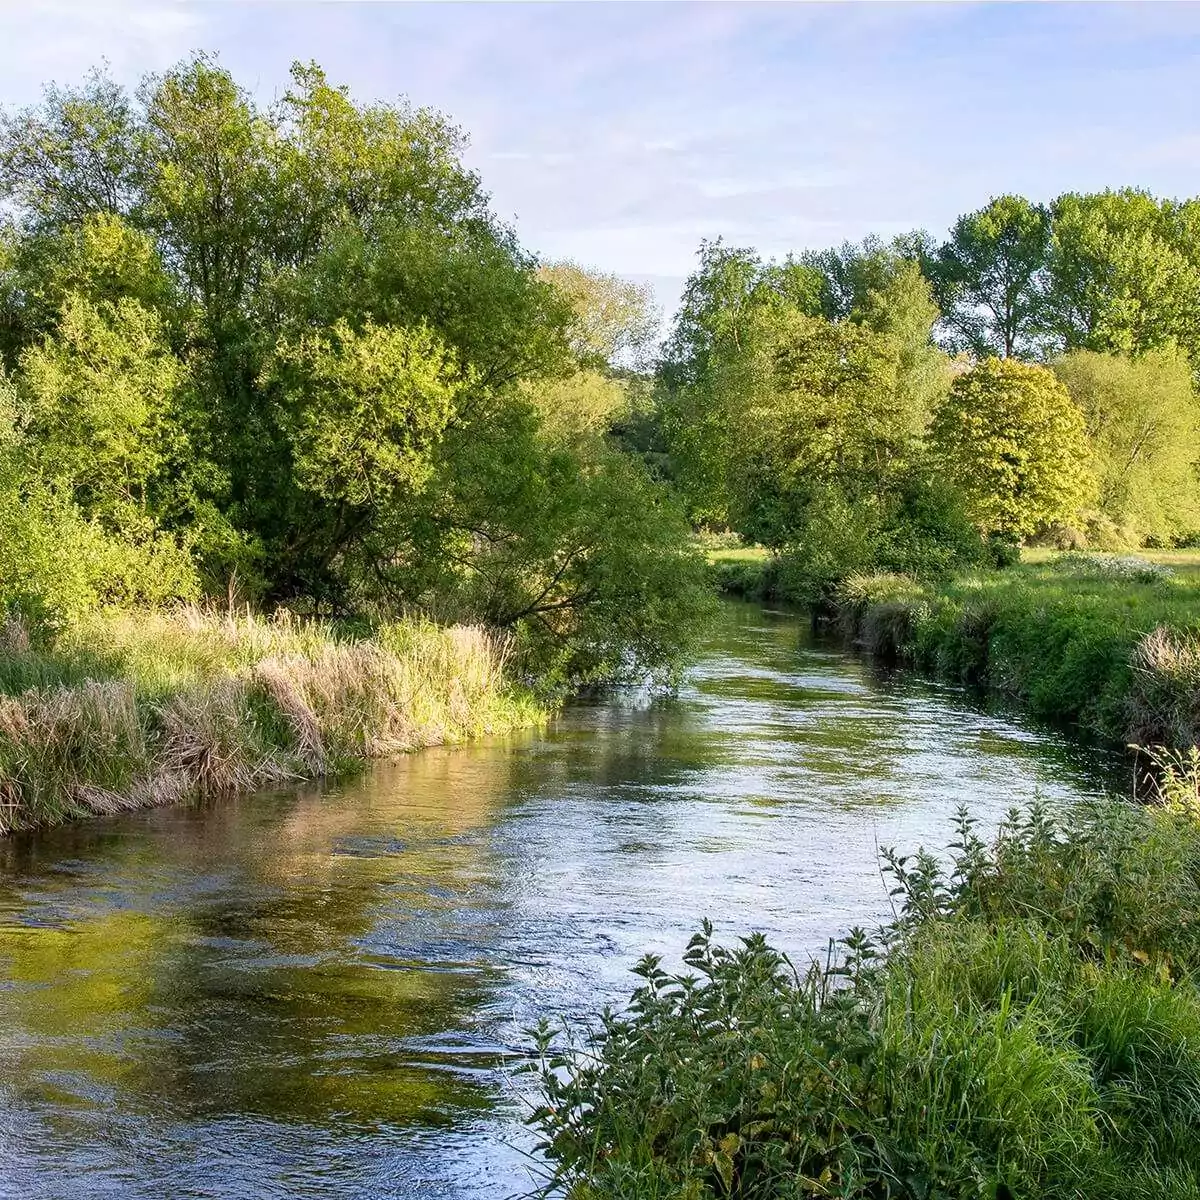 Butler Country Estates lies in the heart of Hampshire just a few minutes from the chalk stream Rivers Test, Itchen and Meon.